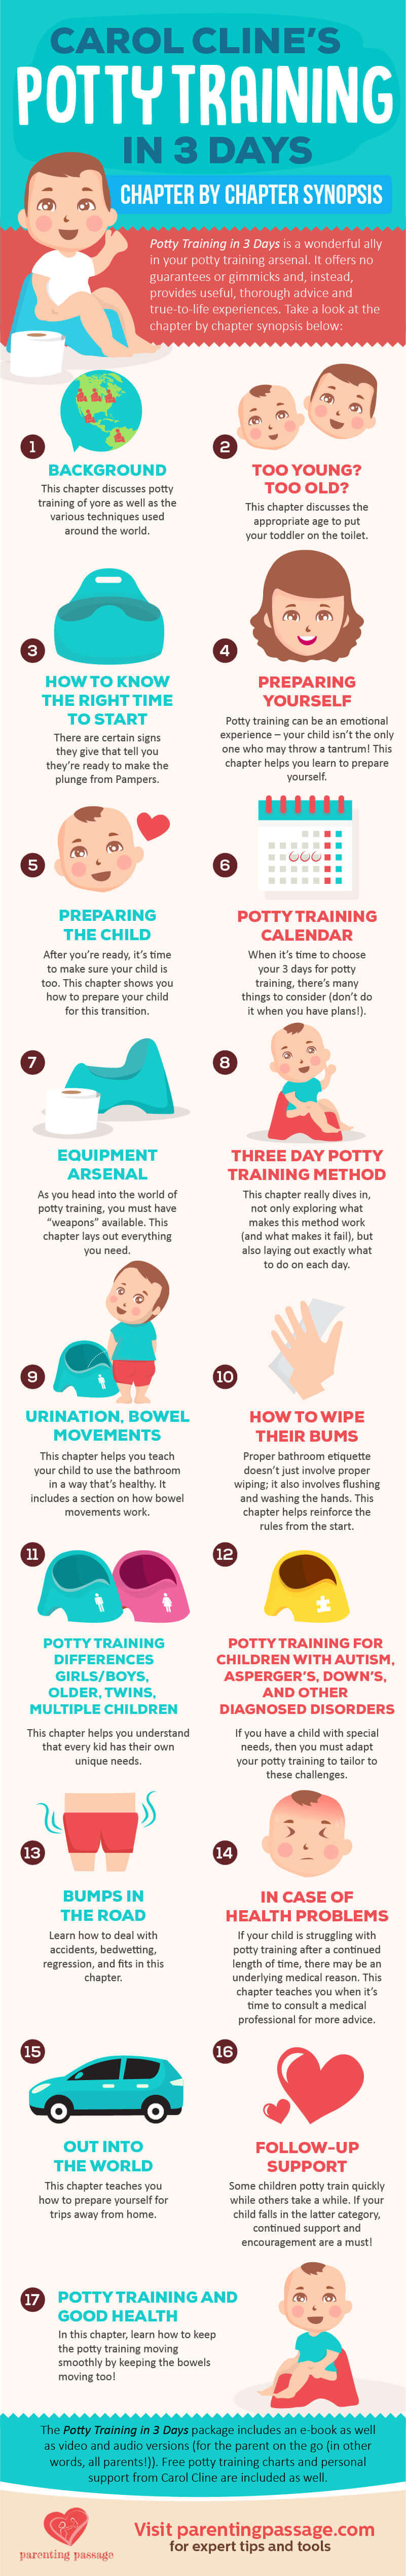 Carol-Cline-Potty-Training-in-3-Days-Synopsis | Infographics Race